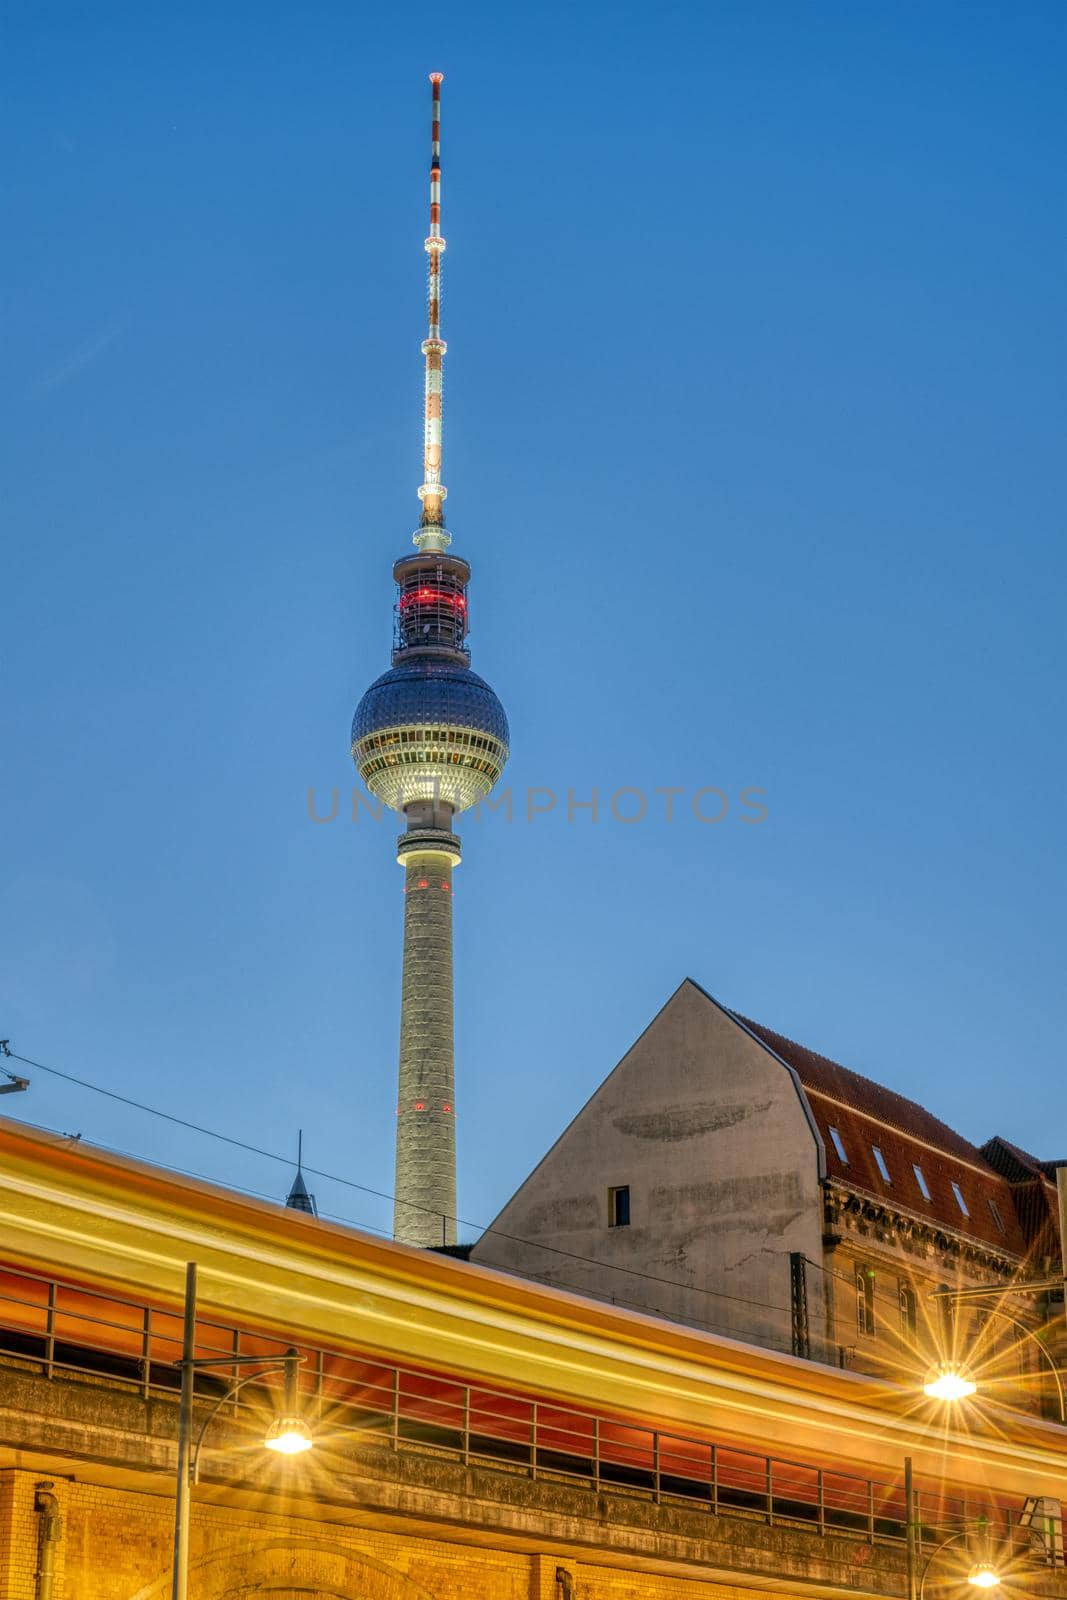 The famous TV Tower in Berlin at twilight with a motion blurred commuter train